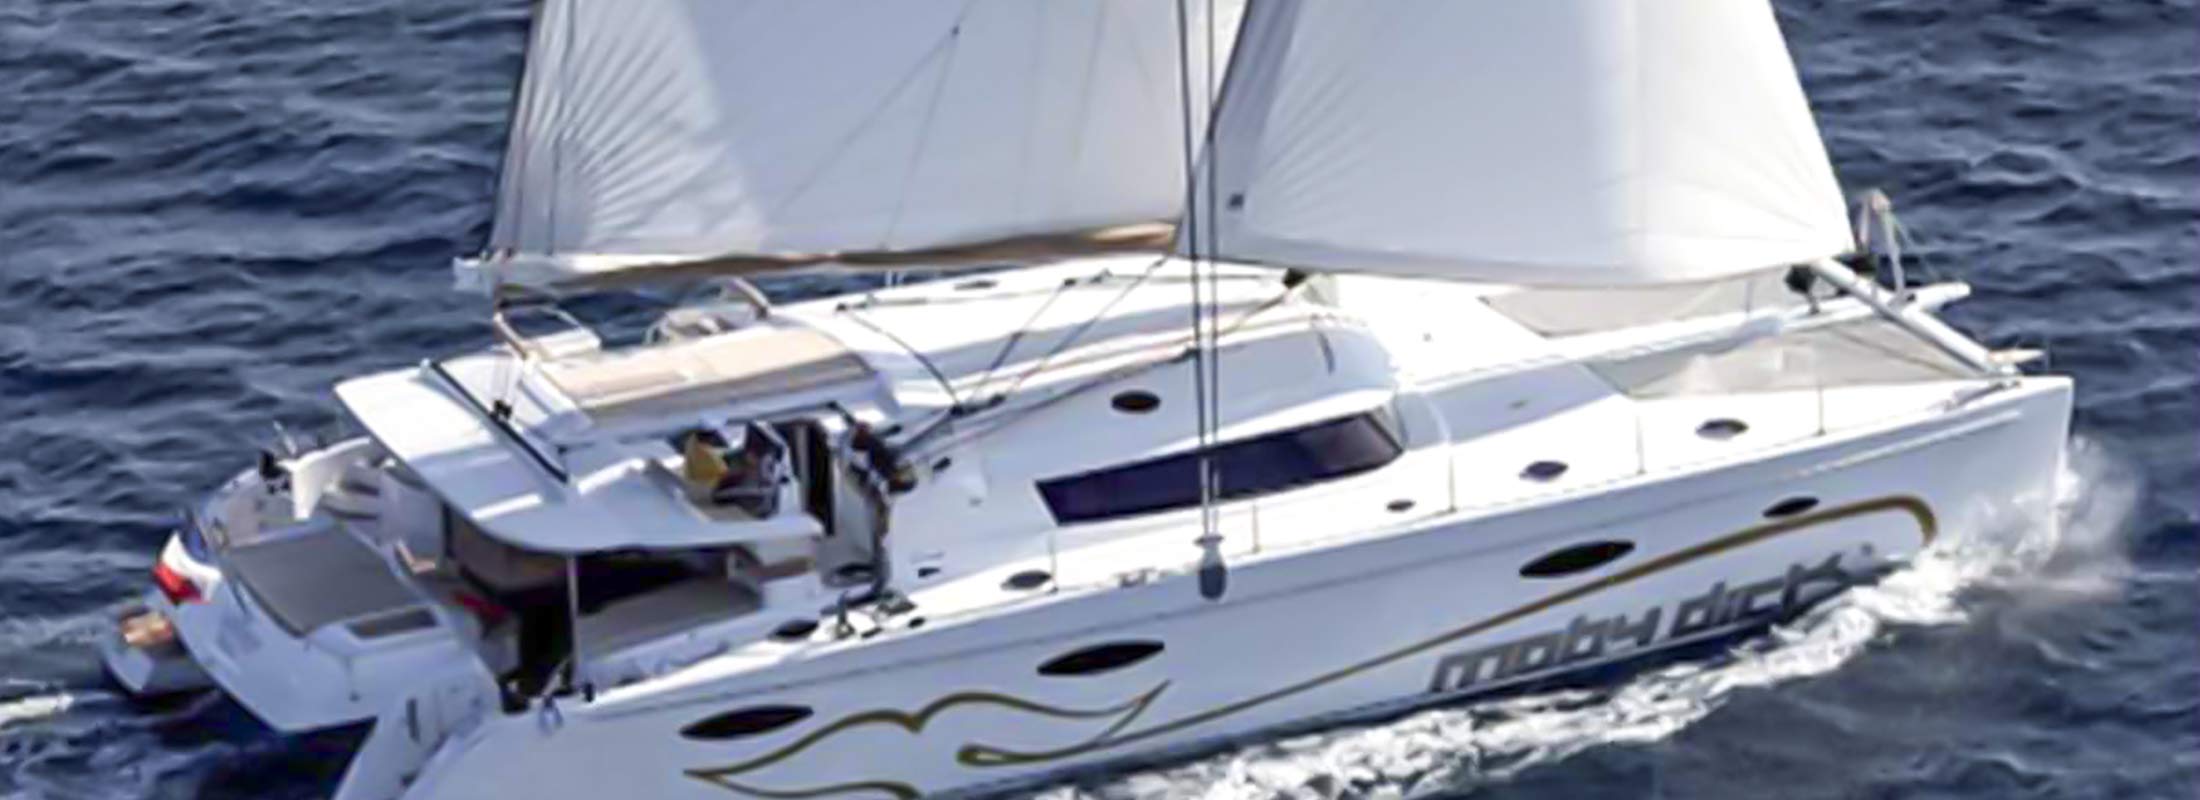 Moby Dick Sailing Yacht for Charter Mediterranean slider 1